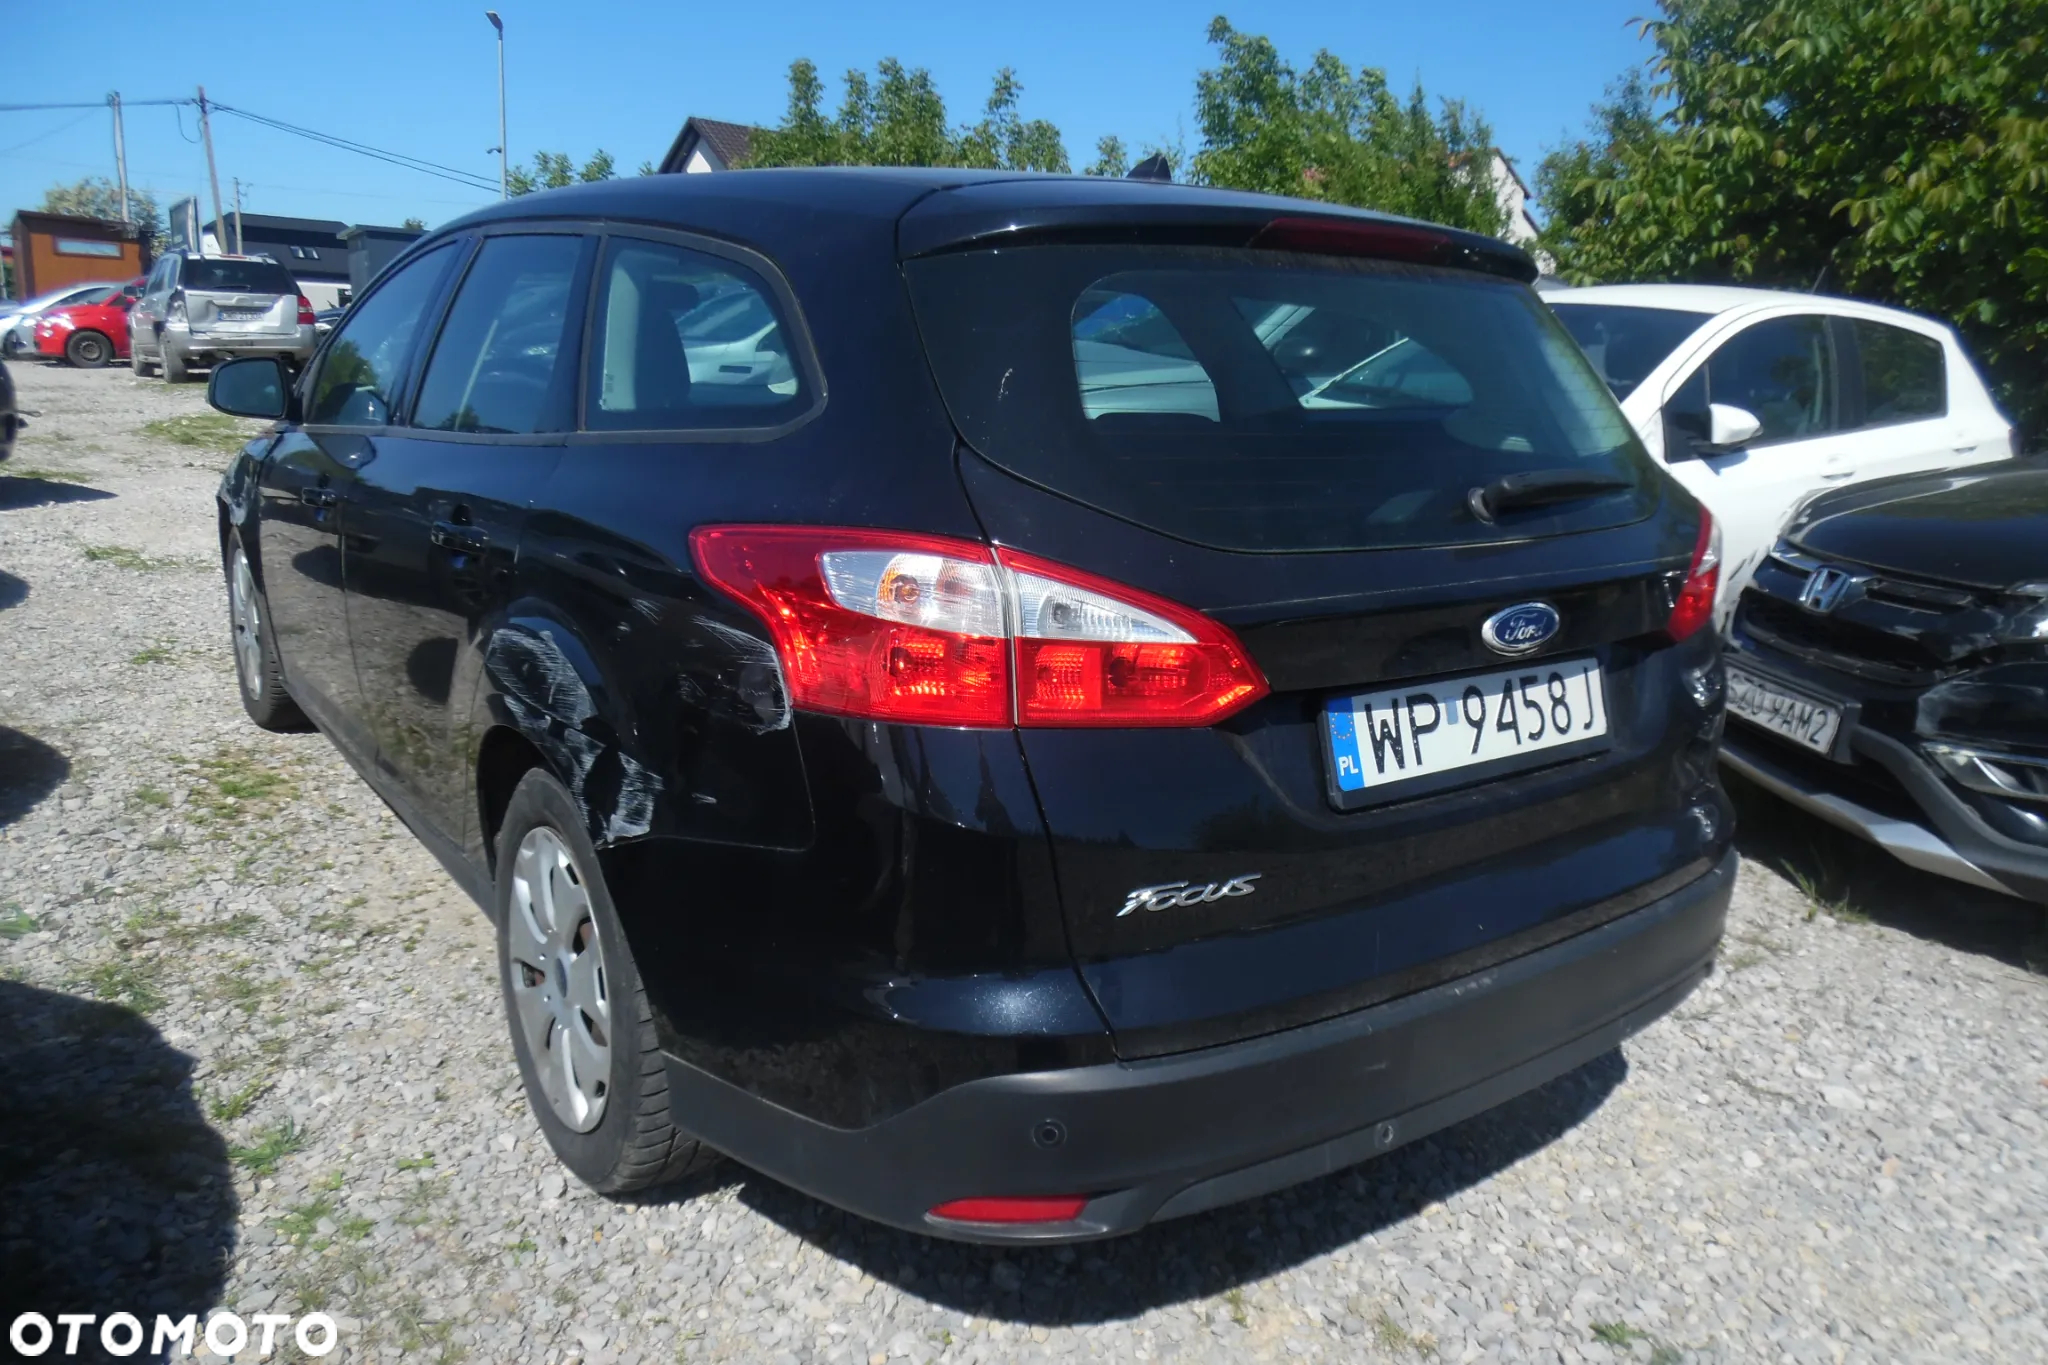 Ford Focus 1.6 TDCi DPF Ambiente - 4